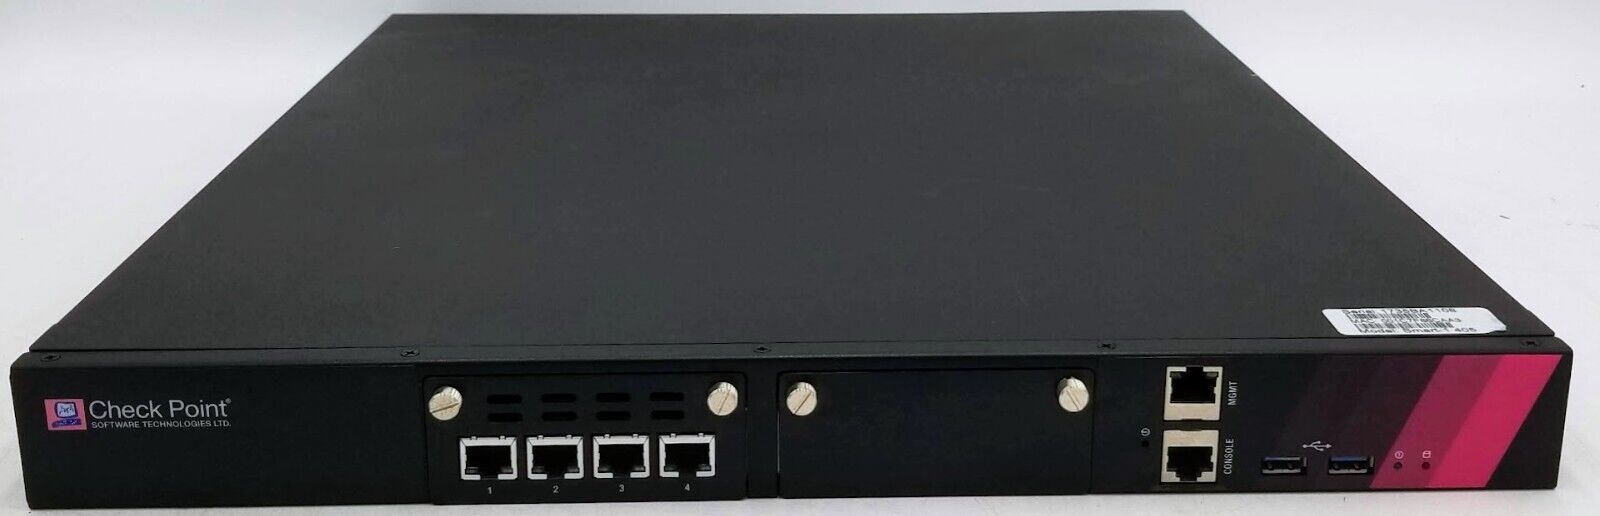 Checkpoint SMART-1 405 Security Appliance